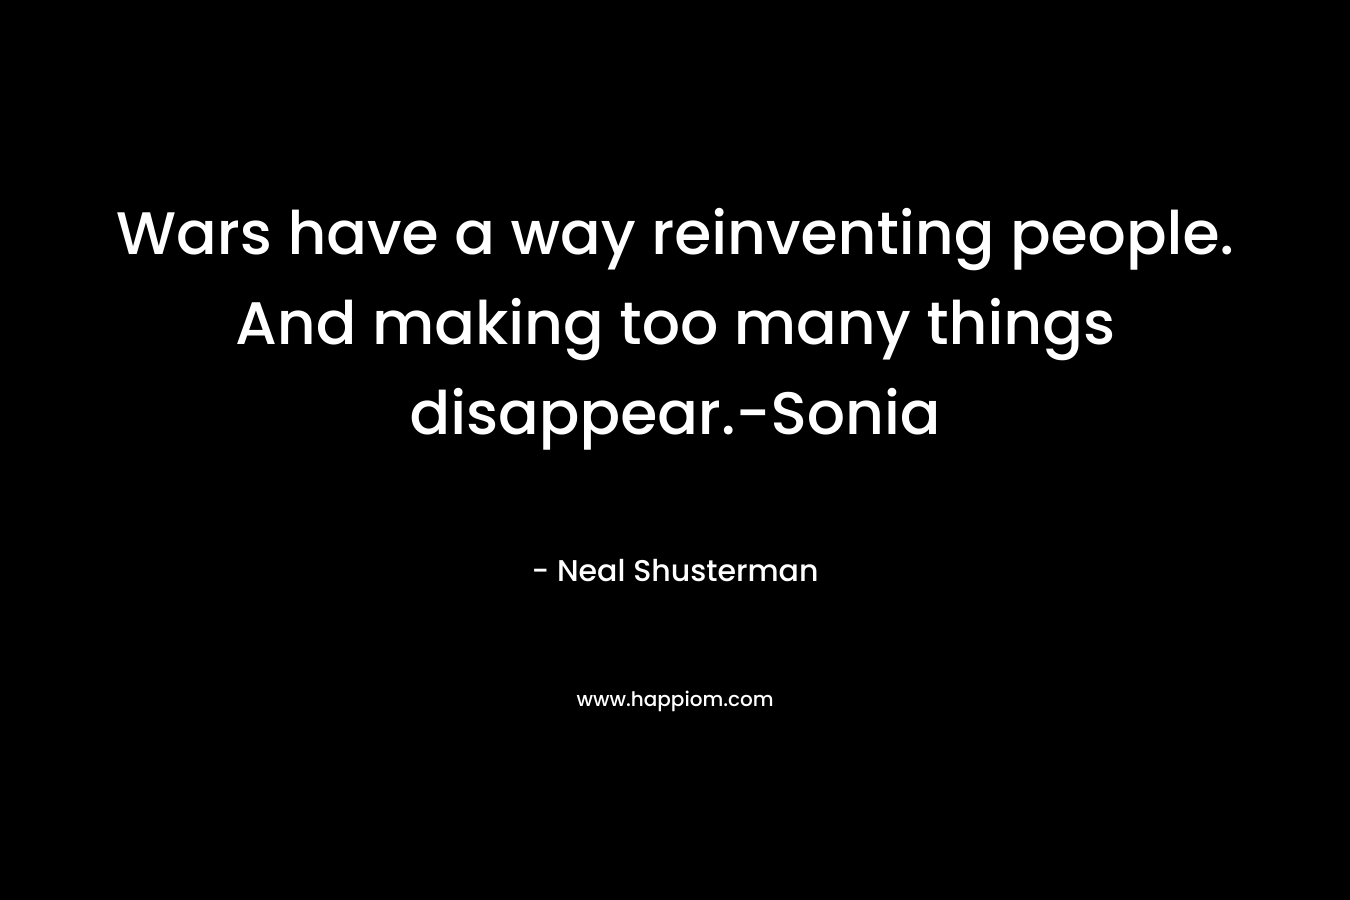 Wars have a way reinventing people. And making too many things disappear.-Sonia – Neal Shusterman